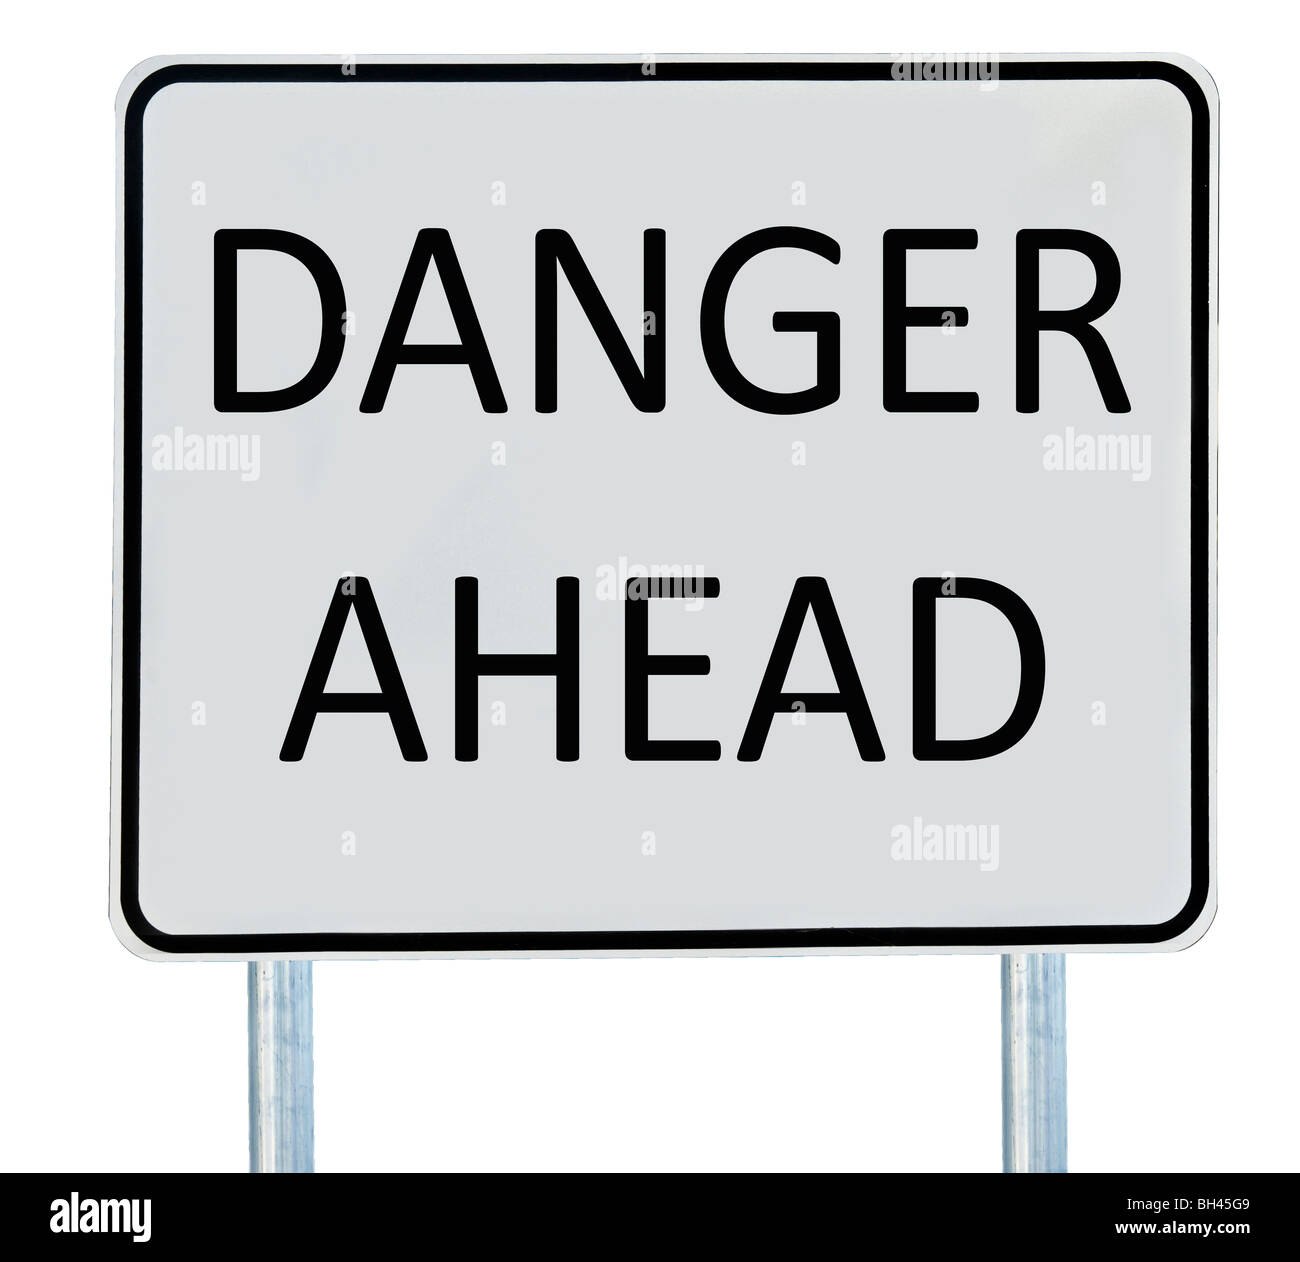 A 'Danger Ahead' road sign isolated on white. Stock Photo